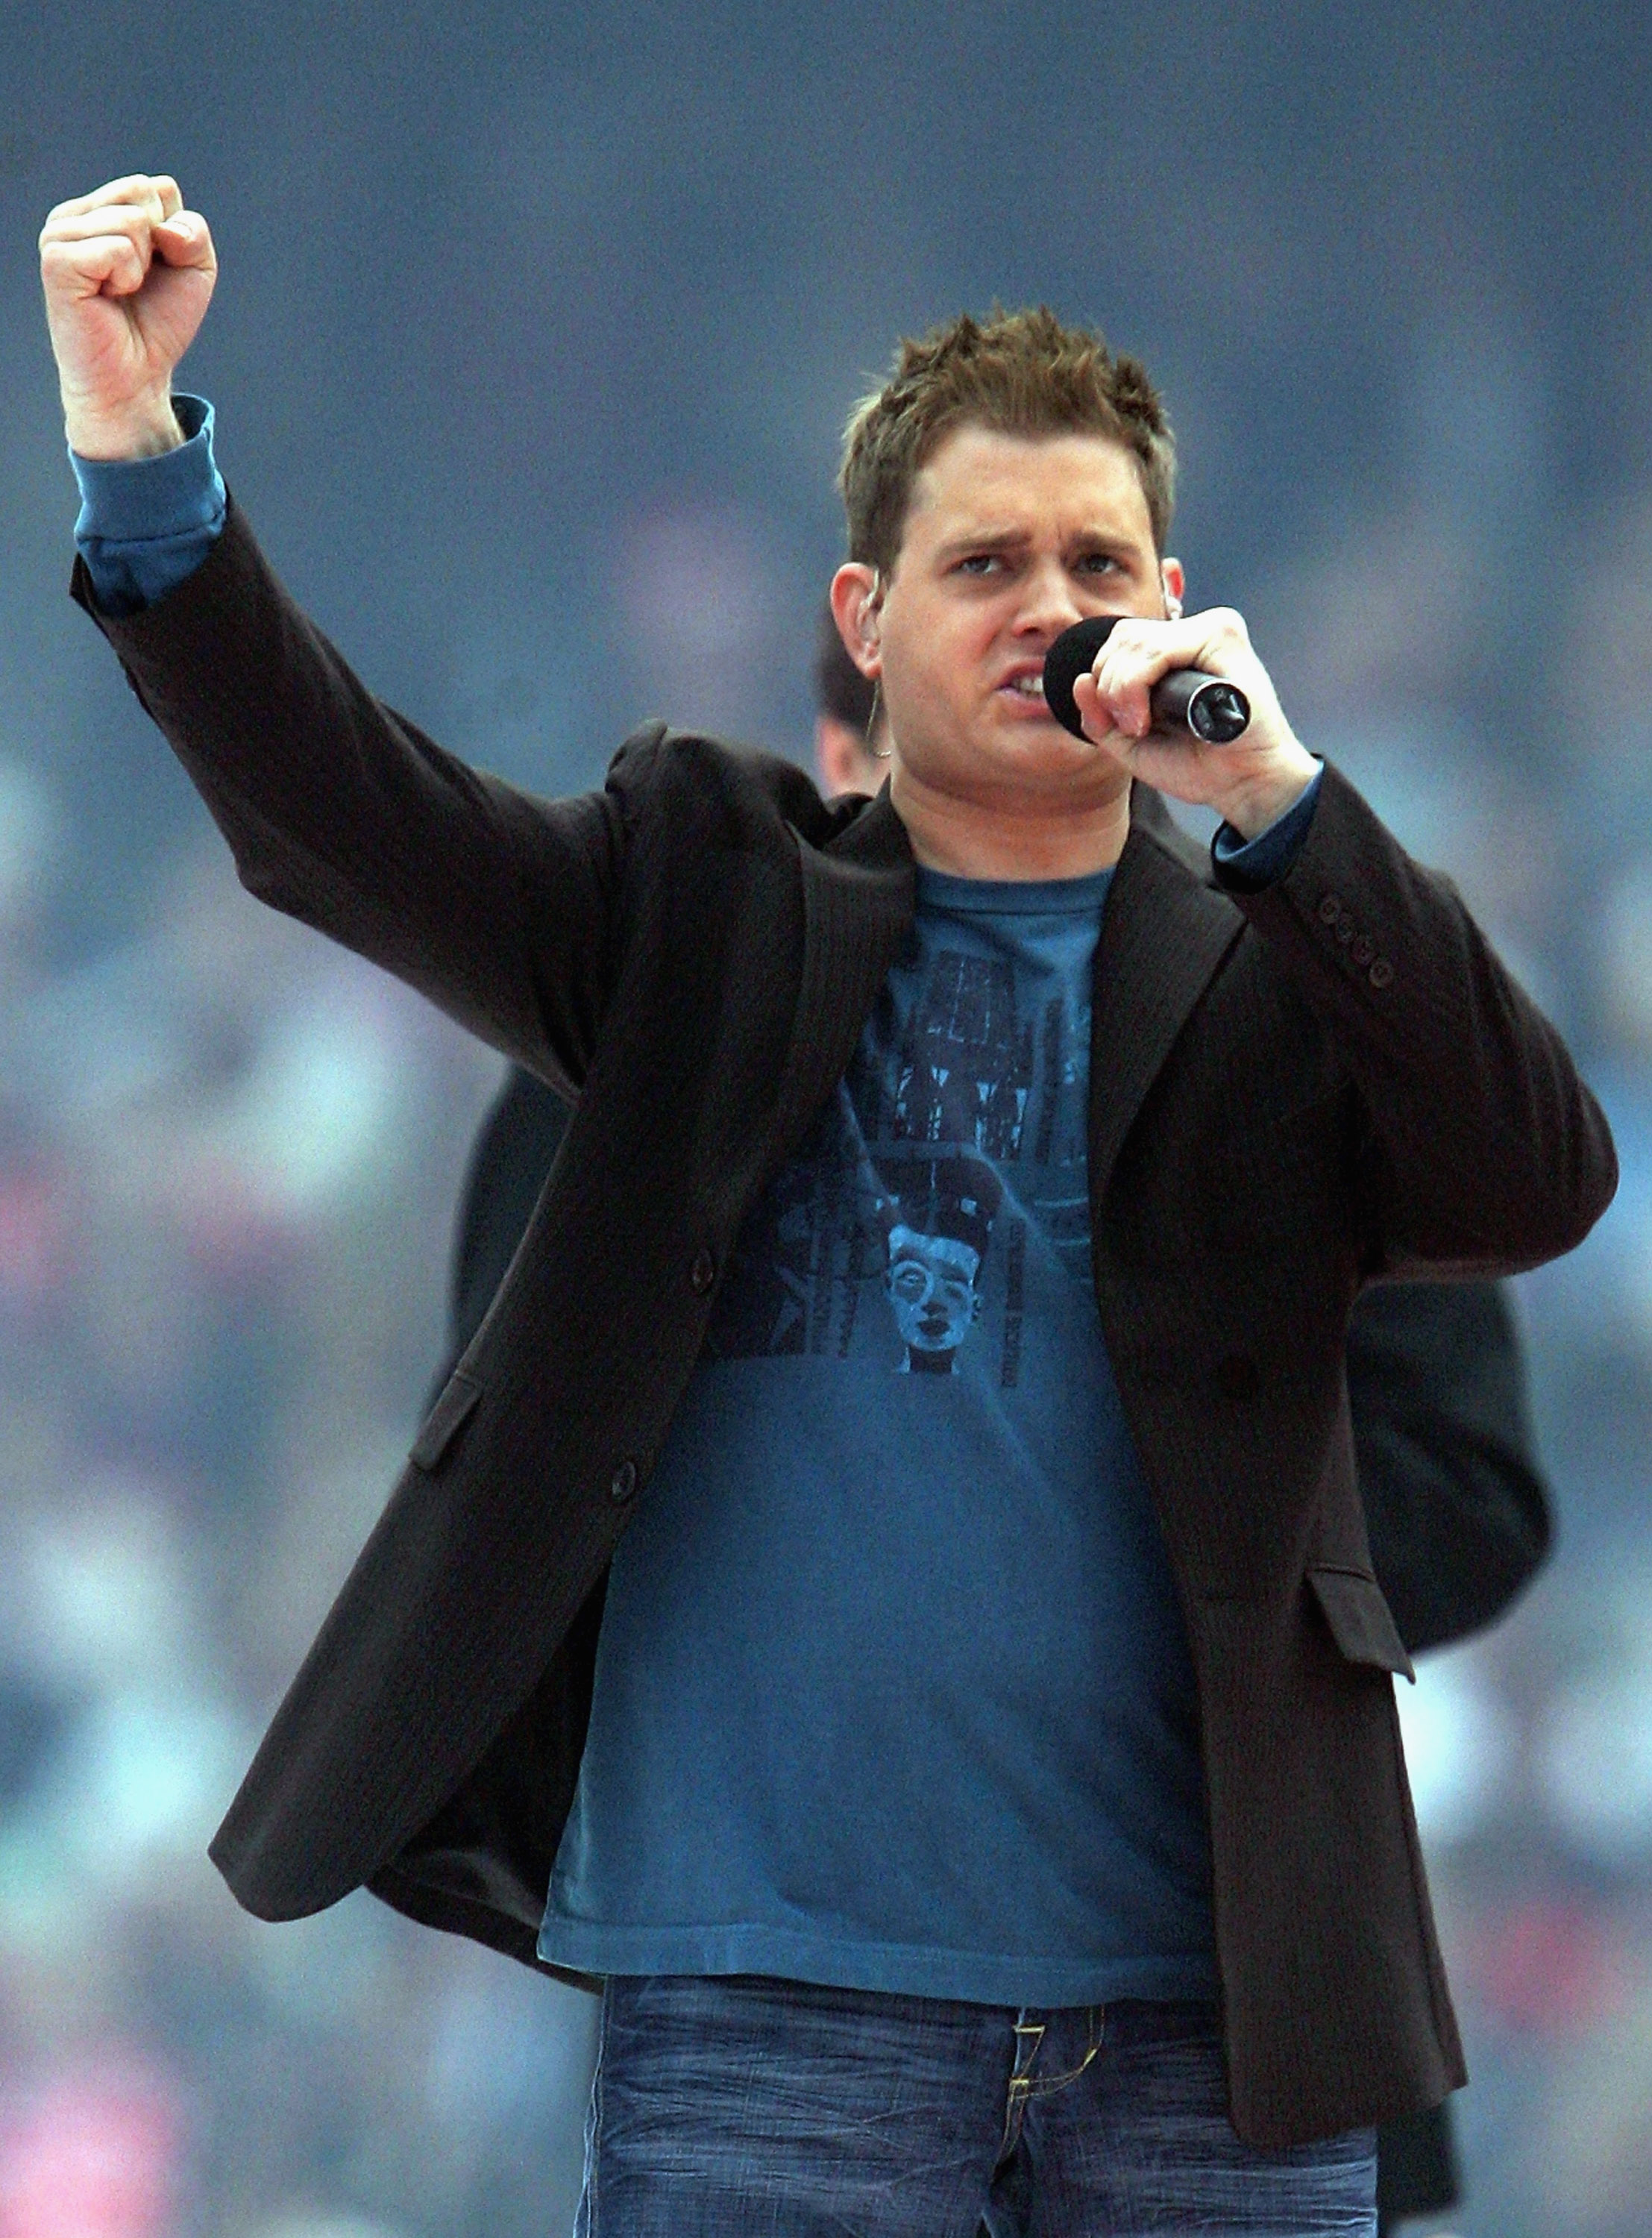 Michael Bublé performs before the 2005 AFL Grand Final at the Melbourne Cricket Ground on September 24, 2005, in Melbourne, Australia | Source: Getty Images